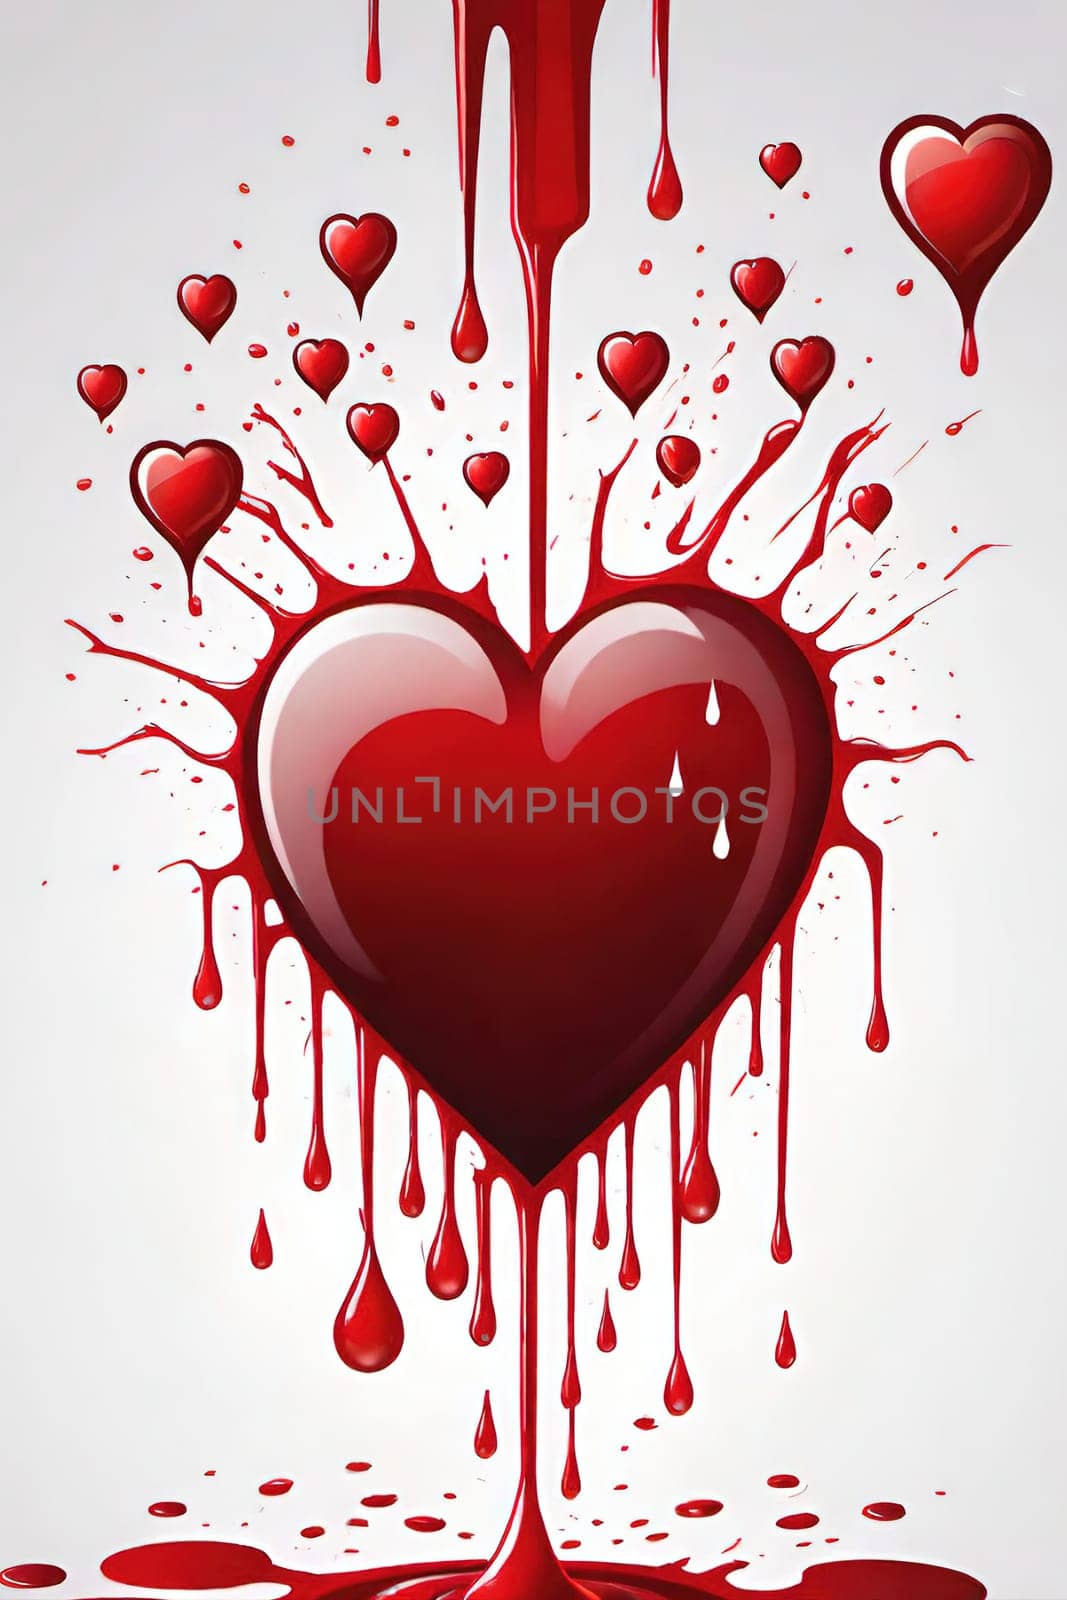 Heart with blood splashes on a gray background. by yilmazsavaskandag